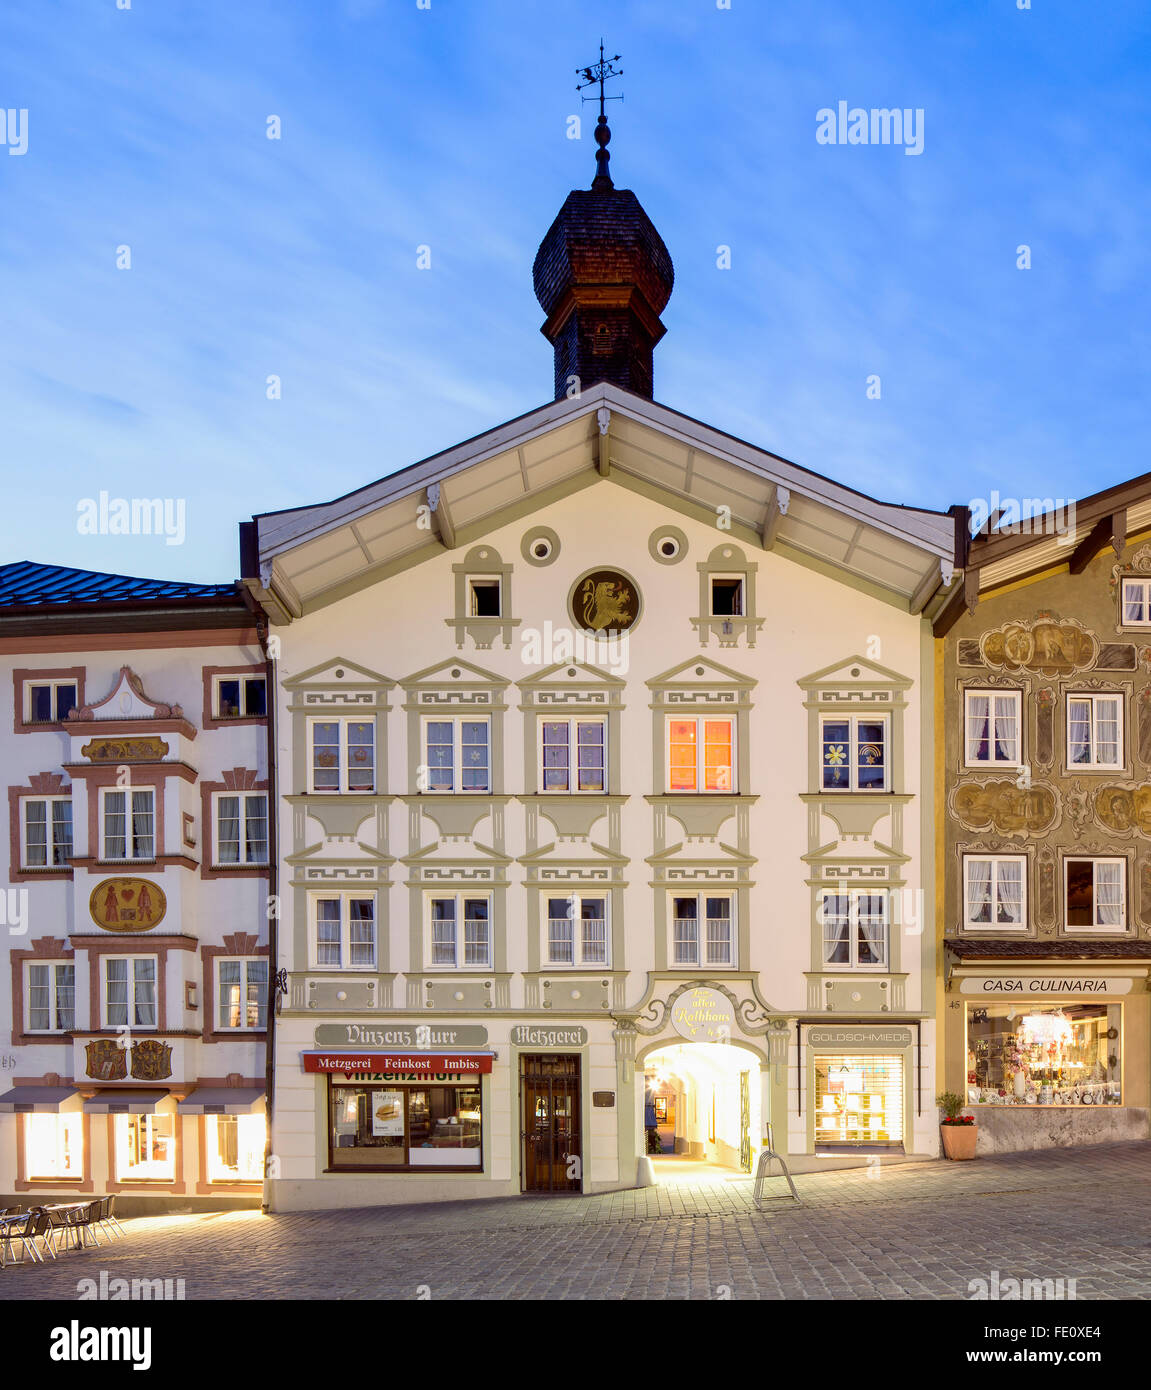 Residential and commercial building, Old Town Hall, Marktstraße, pedestrian area, Bad Tölz, Upper Bavaria, Bavaria, Germany Stock Photo